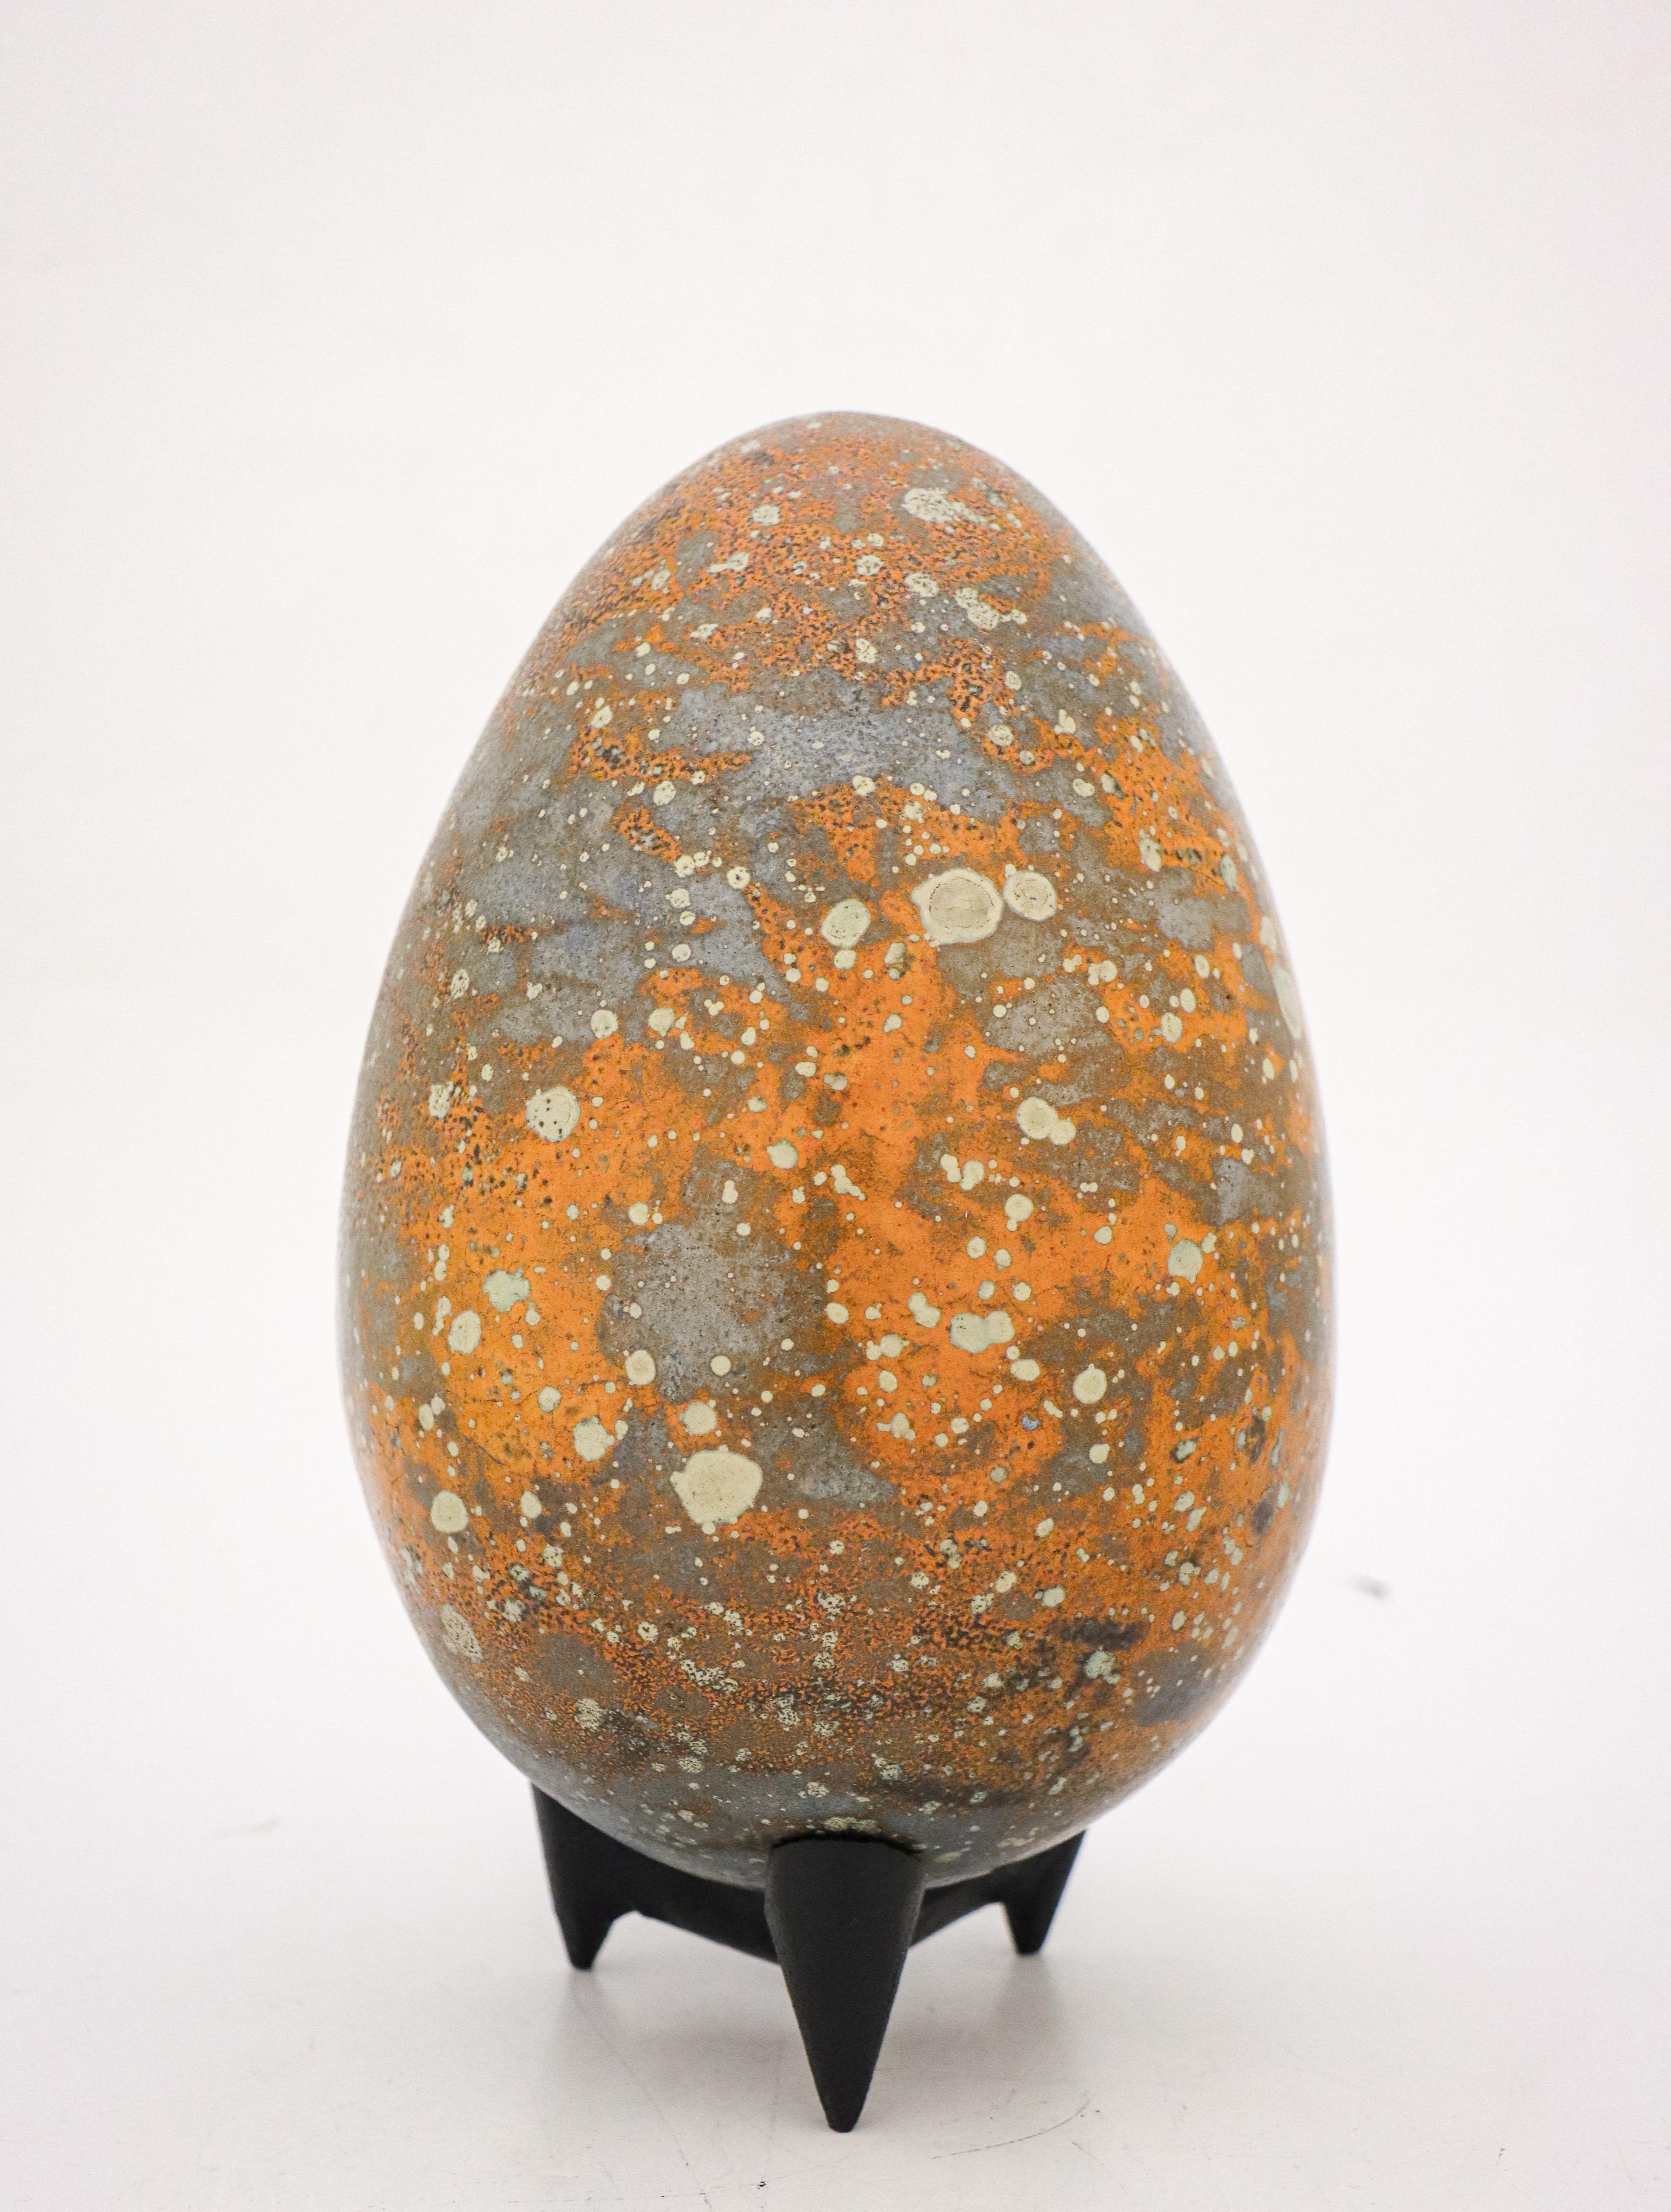 Egg designed by the Swedish ceramicist Hans Hedberg, who lived and worked in Biot, France. This egg is 24.5 cm (9.8